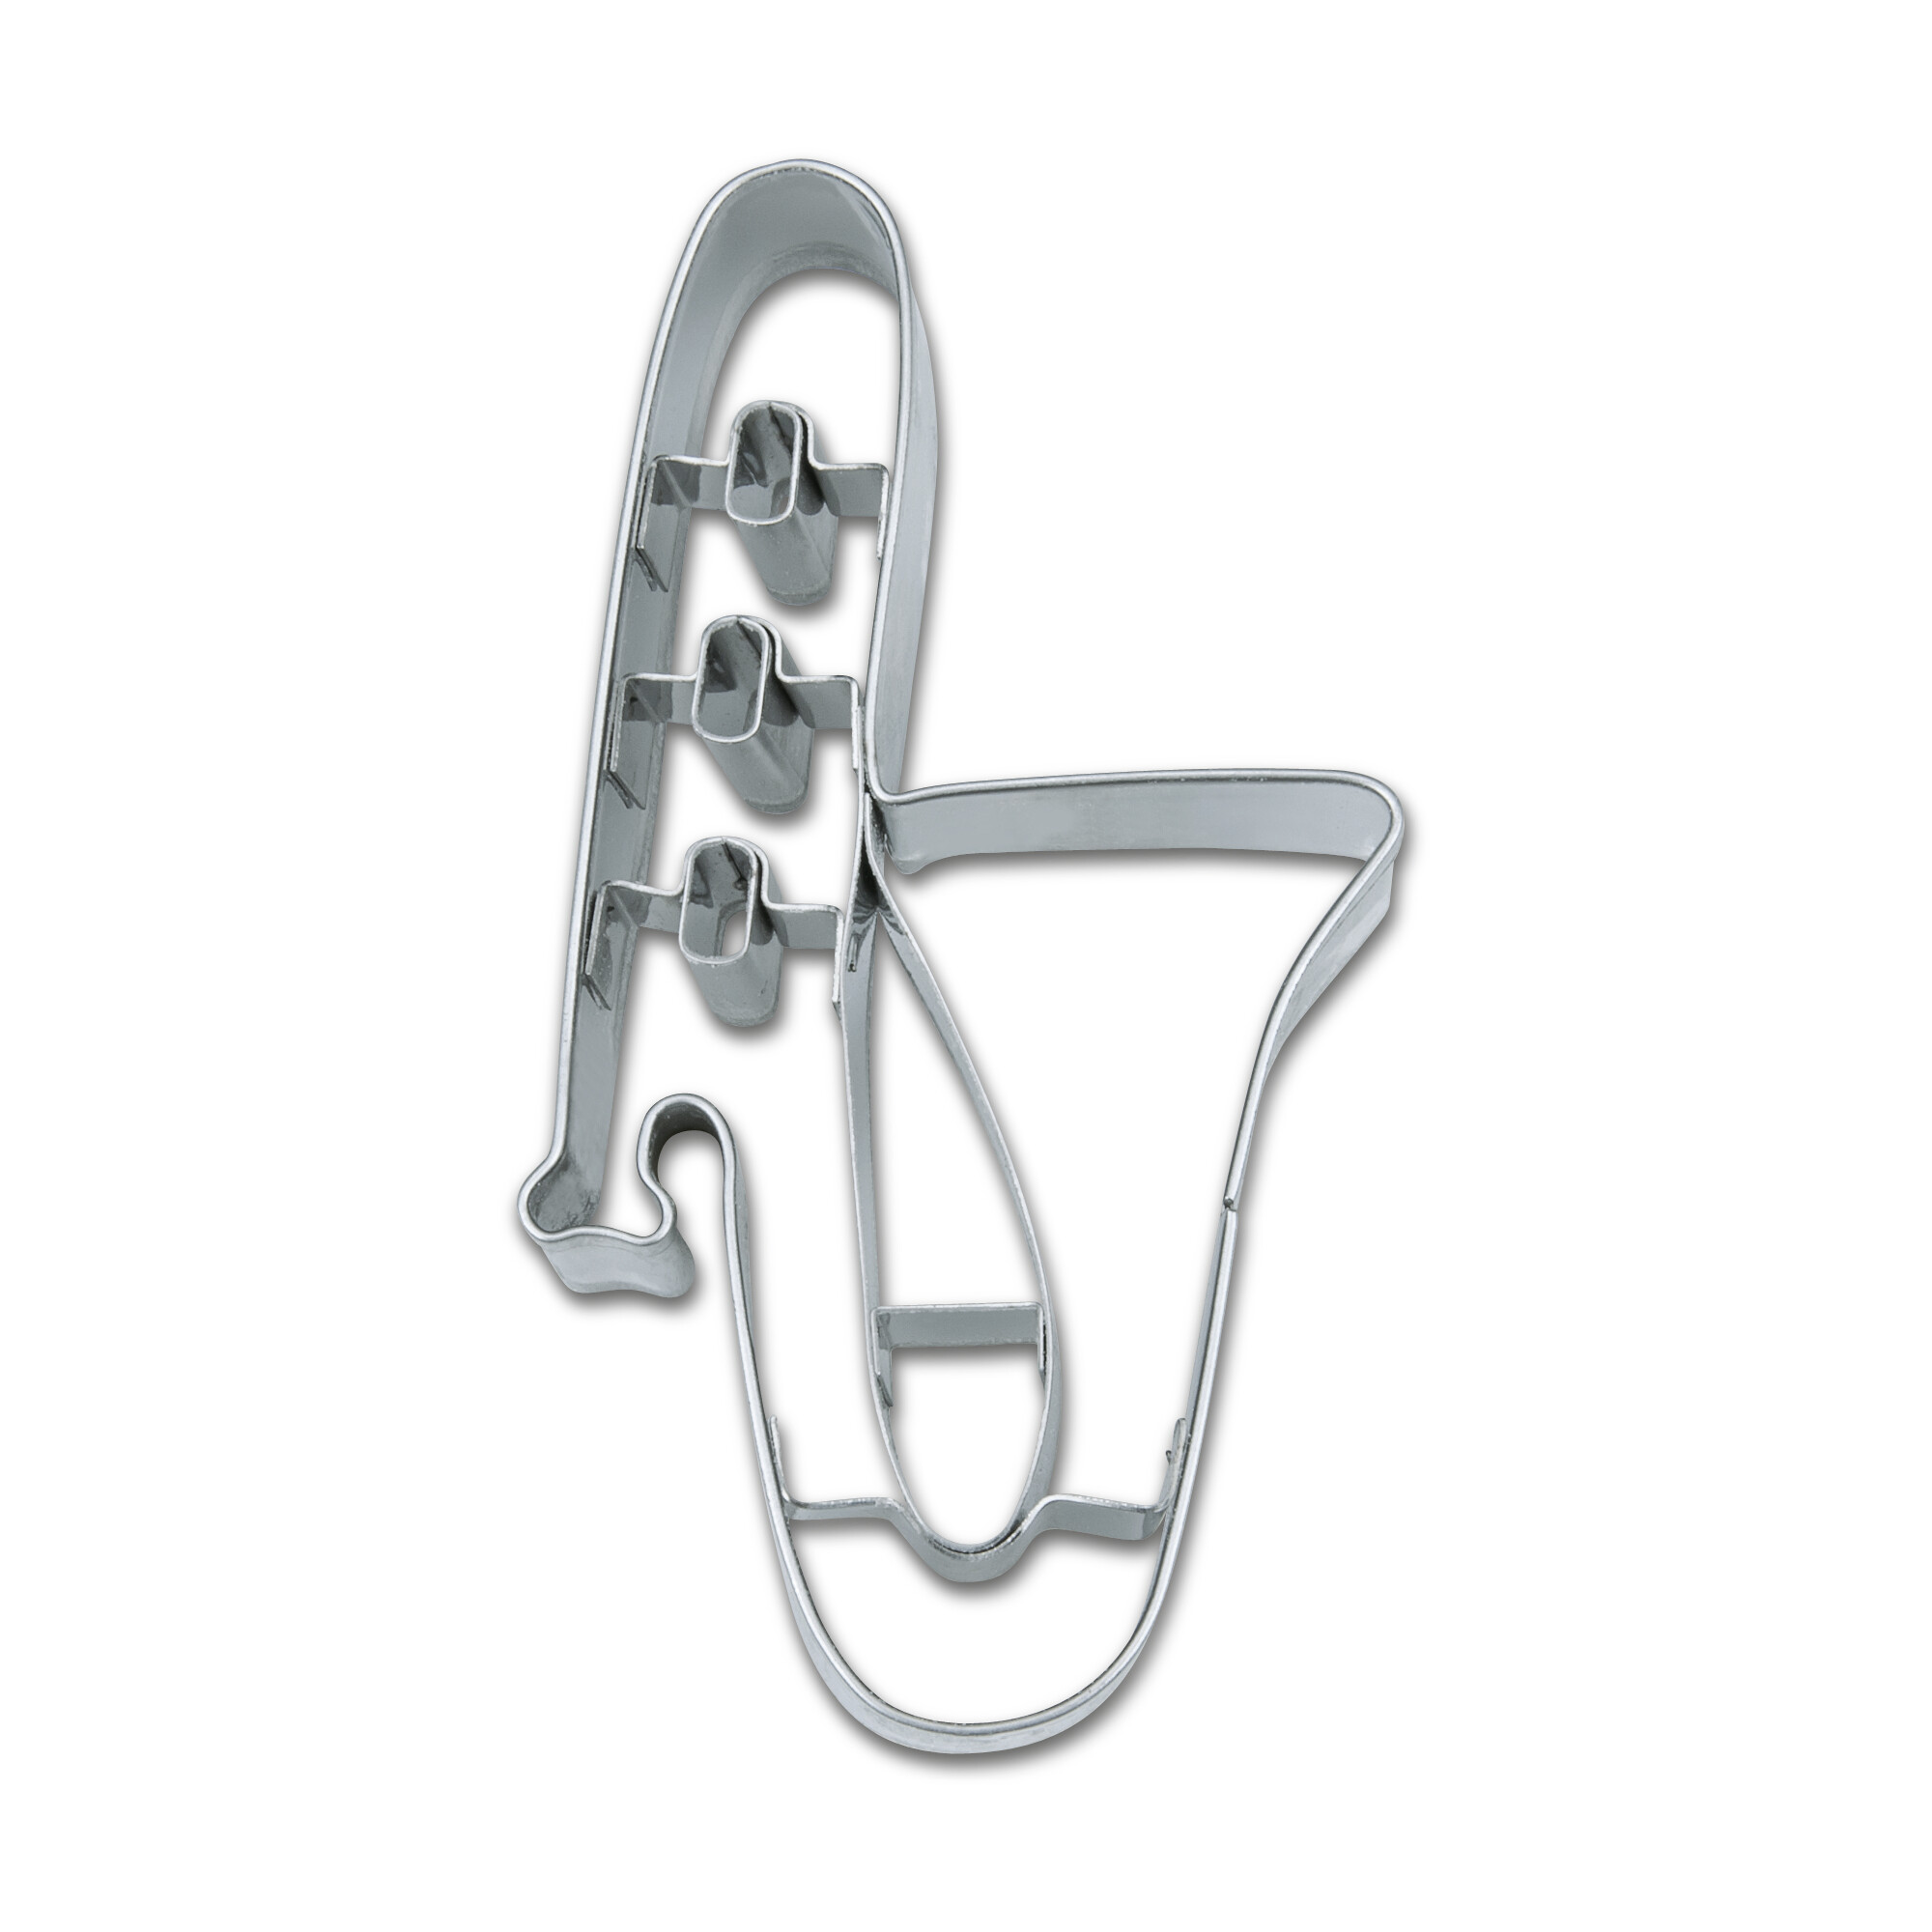 Cookie cutter with stamp – Trombone